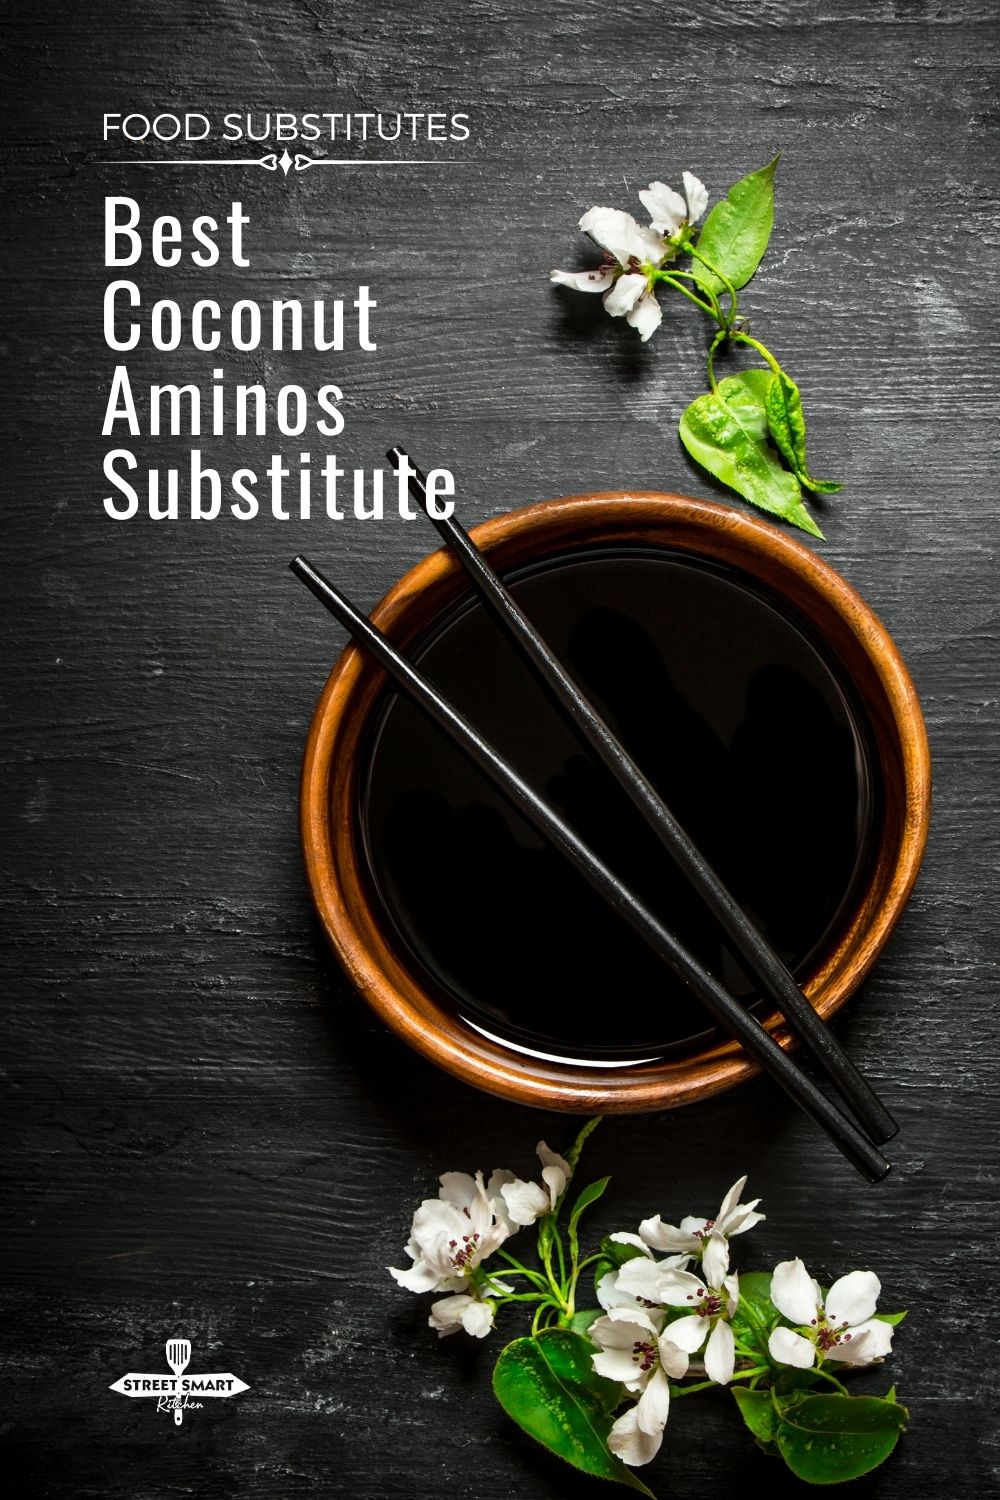 coconut aminos in a bowl with chopsticks and flowers